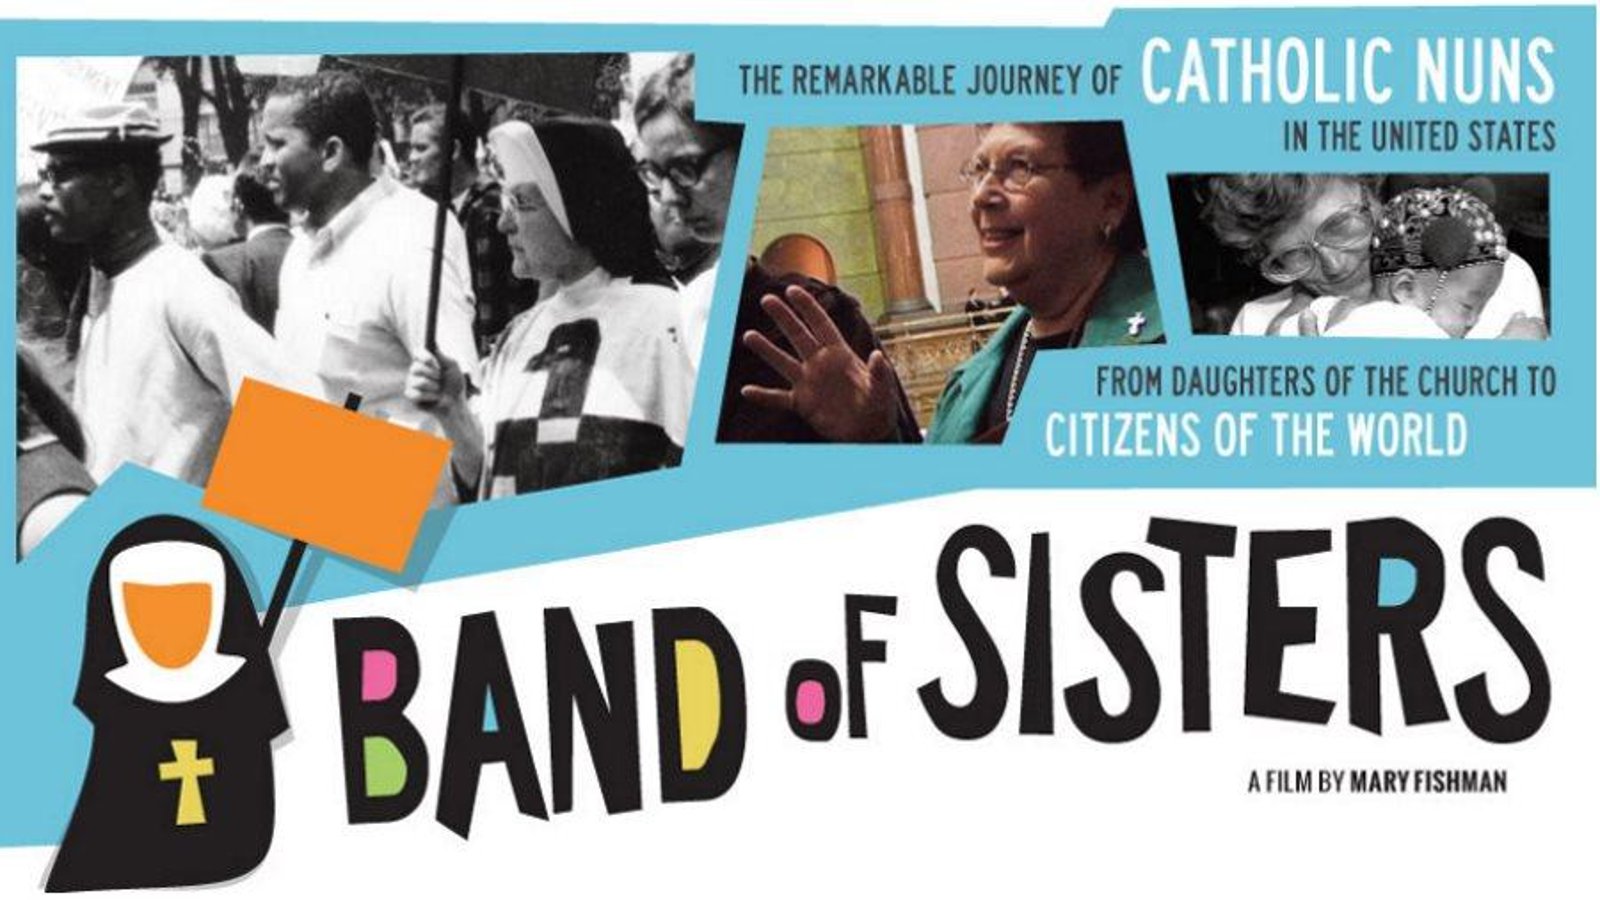 Band of Sisters - Catholic Nuns and Social Justice in the U.S.